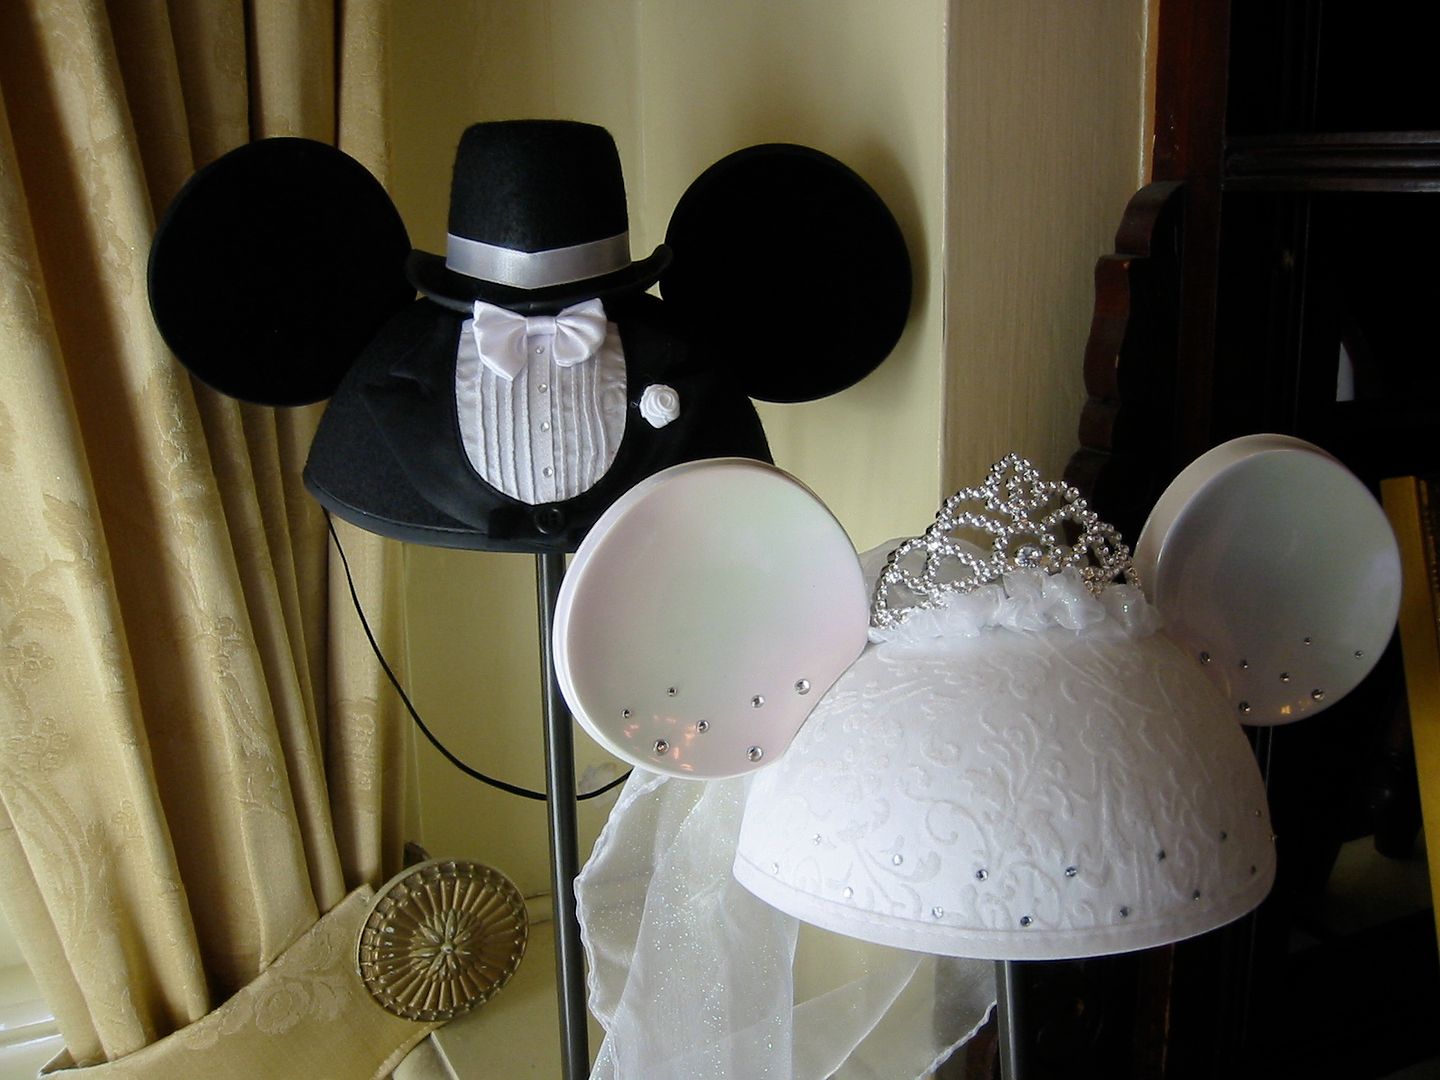 How much are the bridal mouse ears and how many different